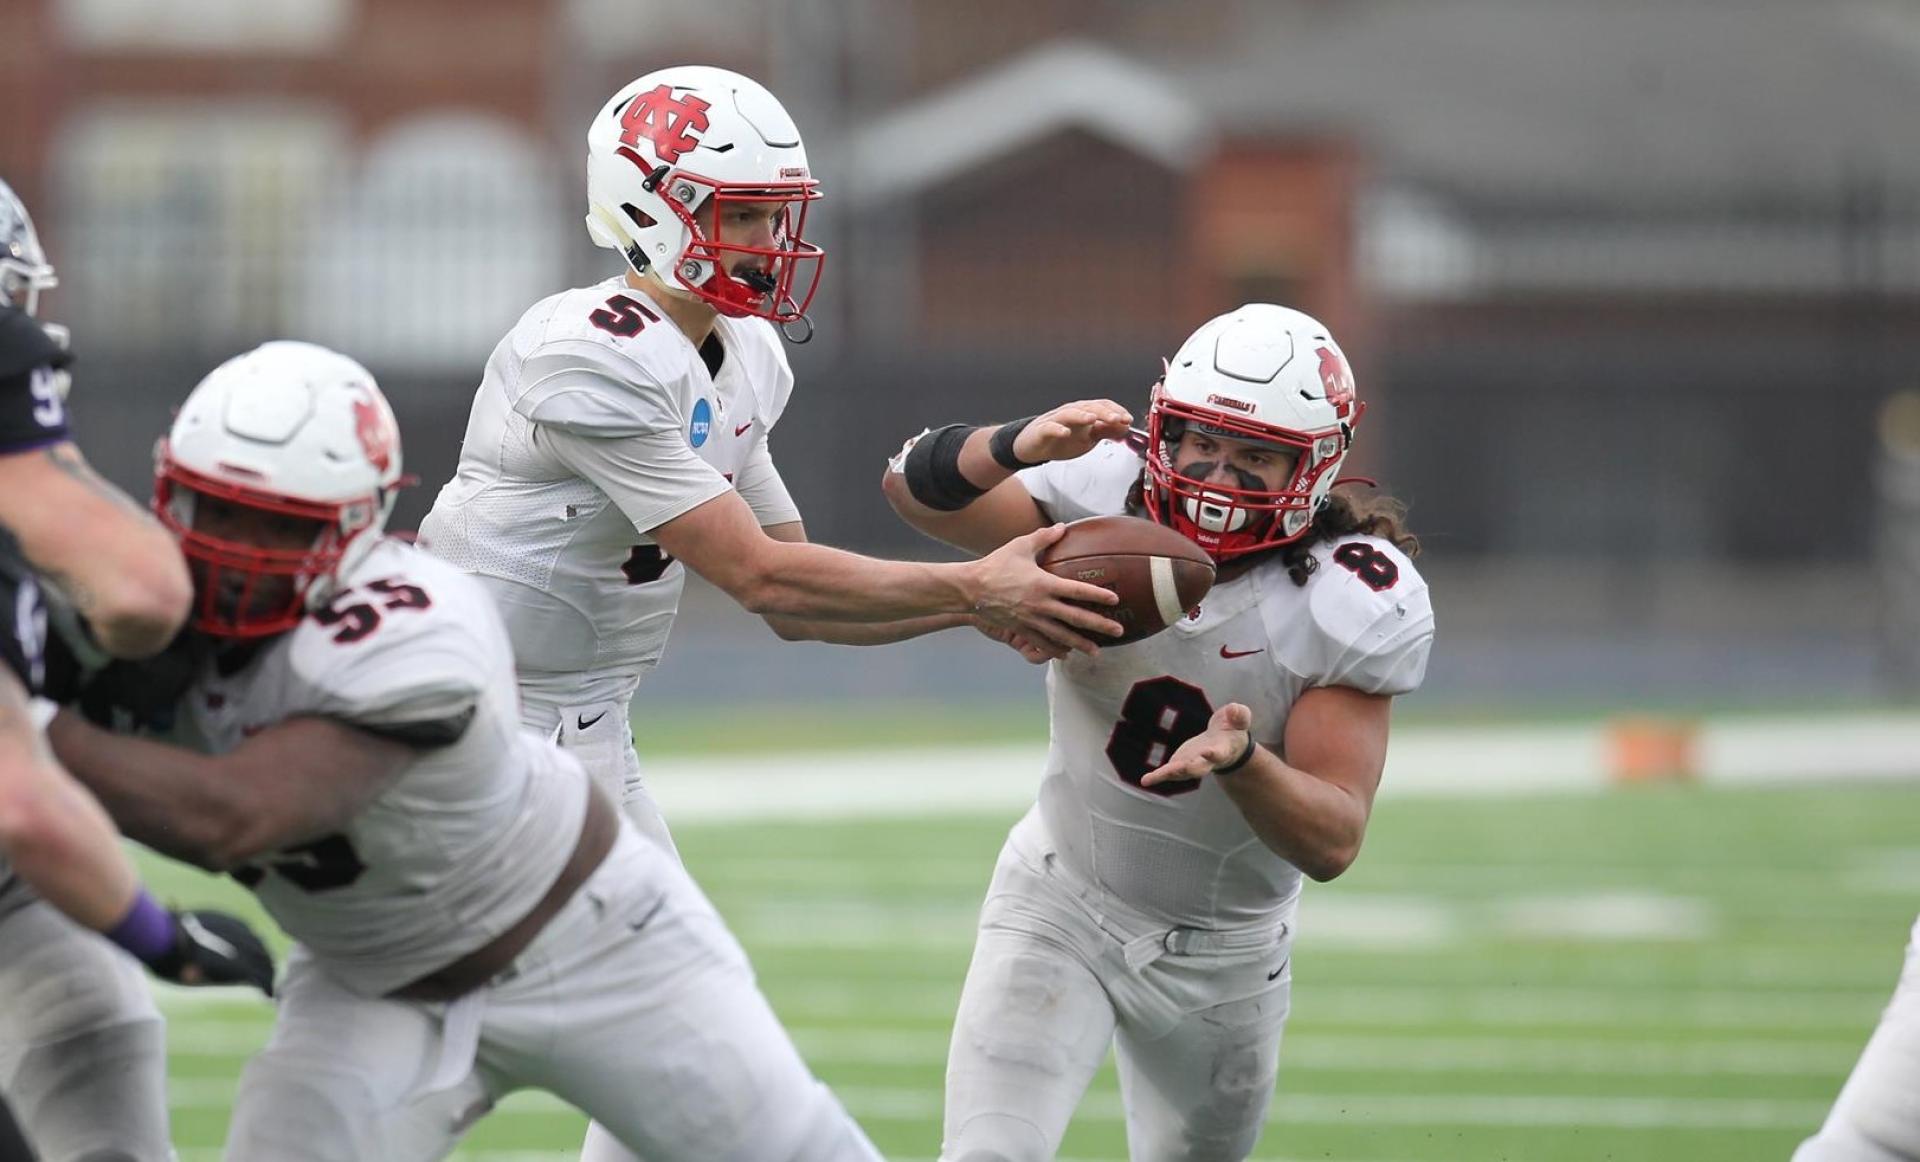 North Central College running back Ethan Greenfield takes a handoff during the Cardinals' win in the national football semifinals.